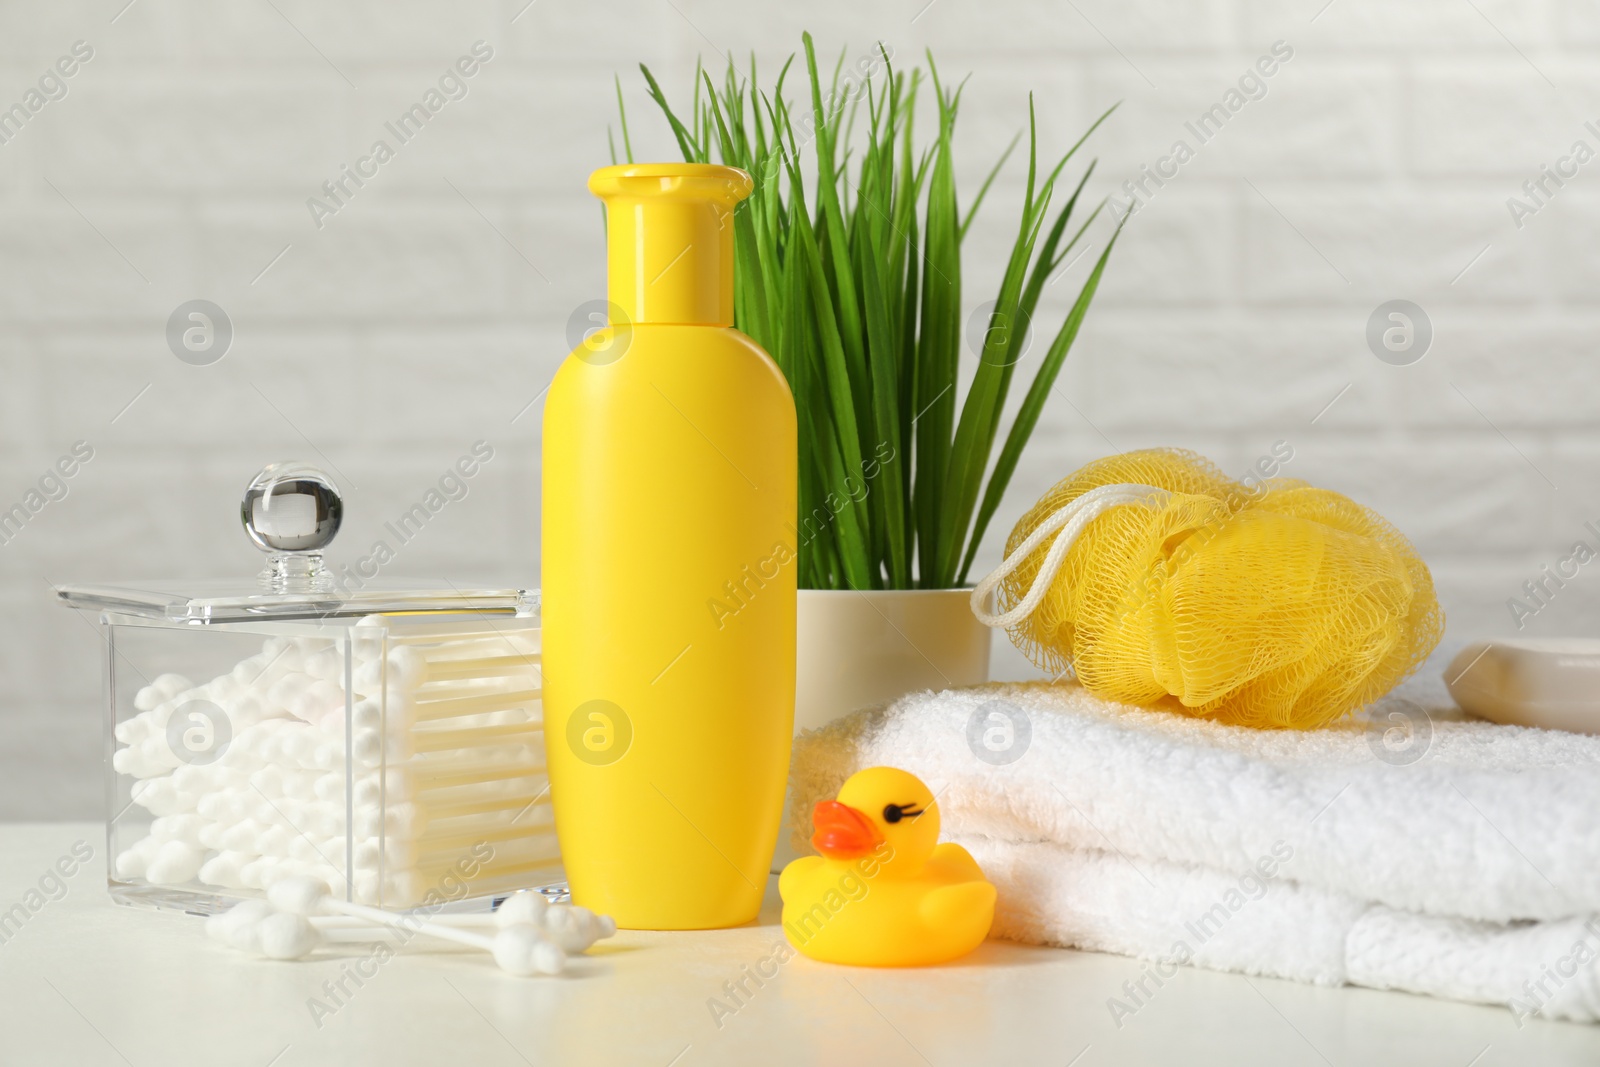 Photo of Baby cosmetic product, bath duck, cotton swabs and towel on white table against brick wall